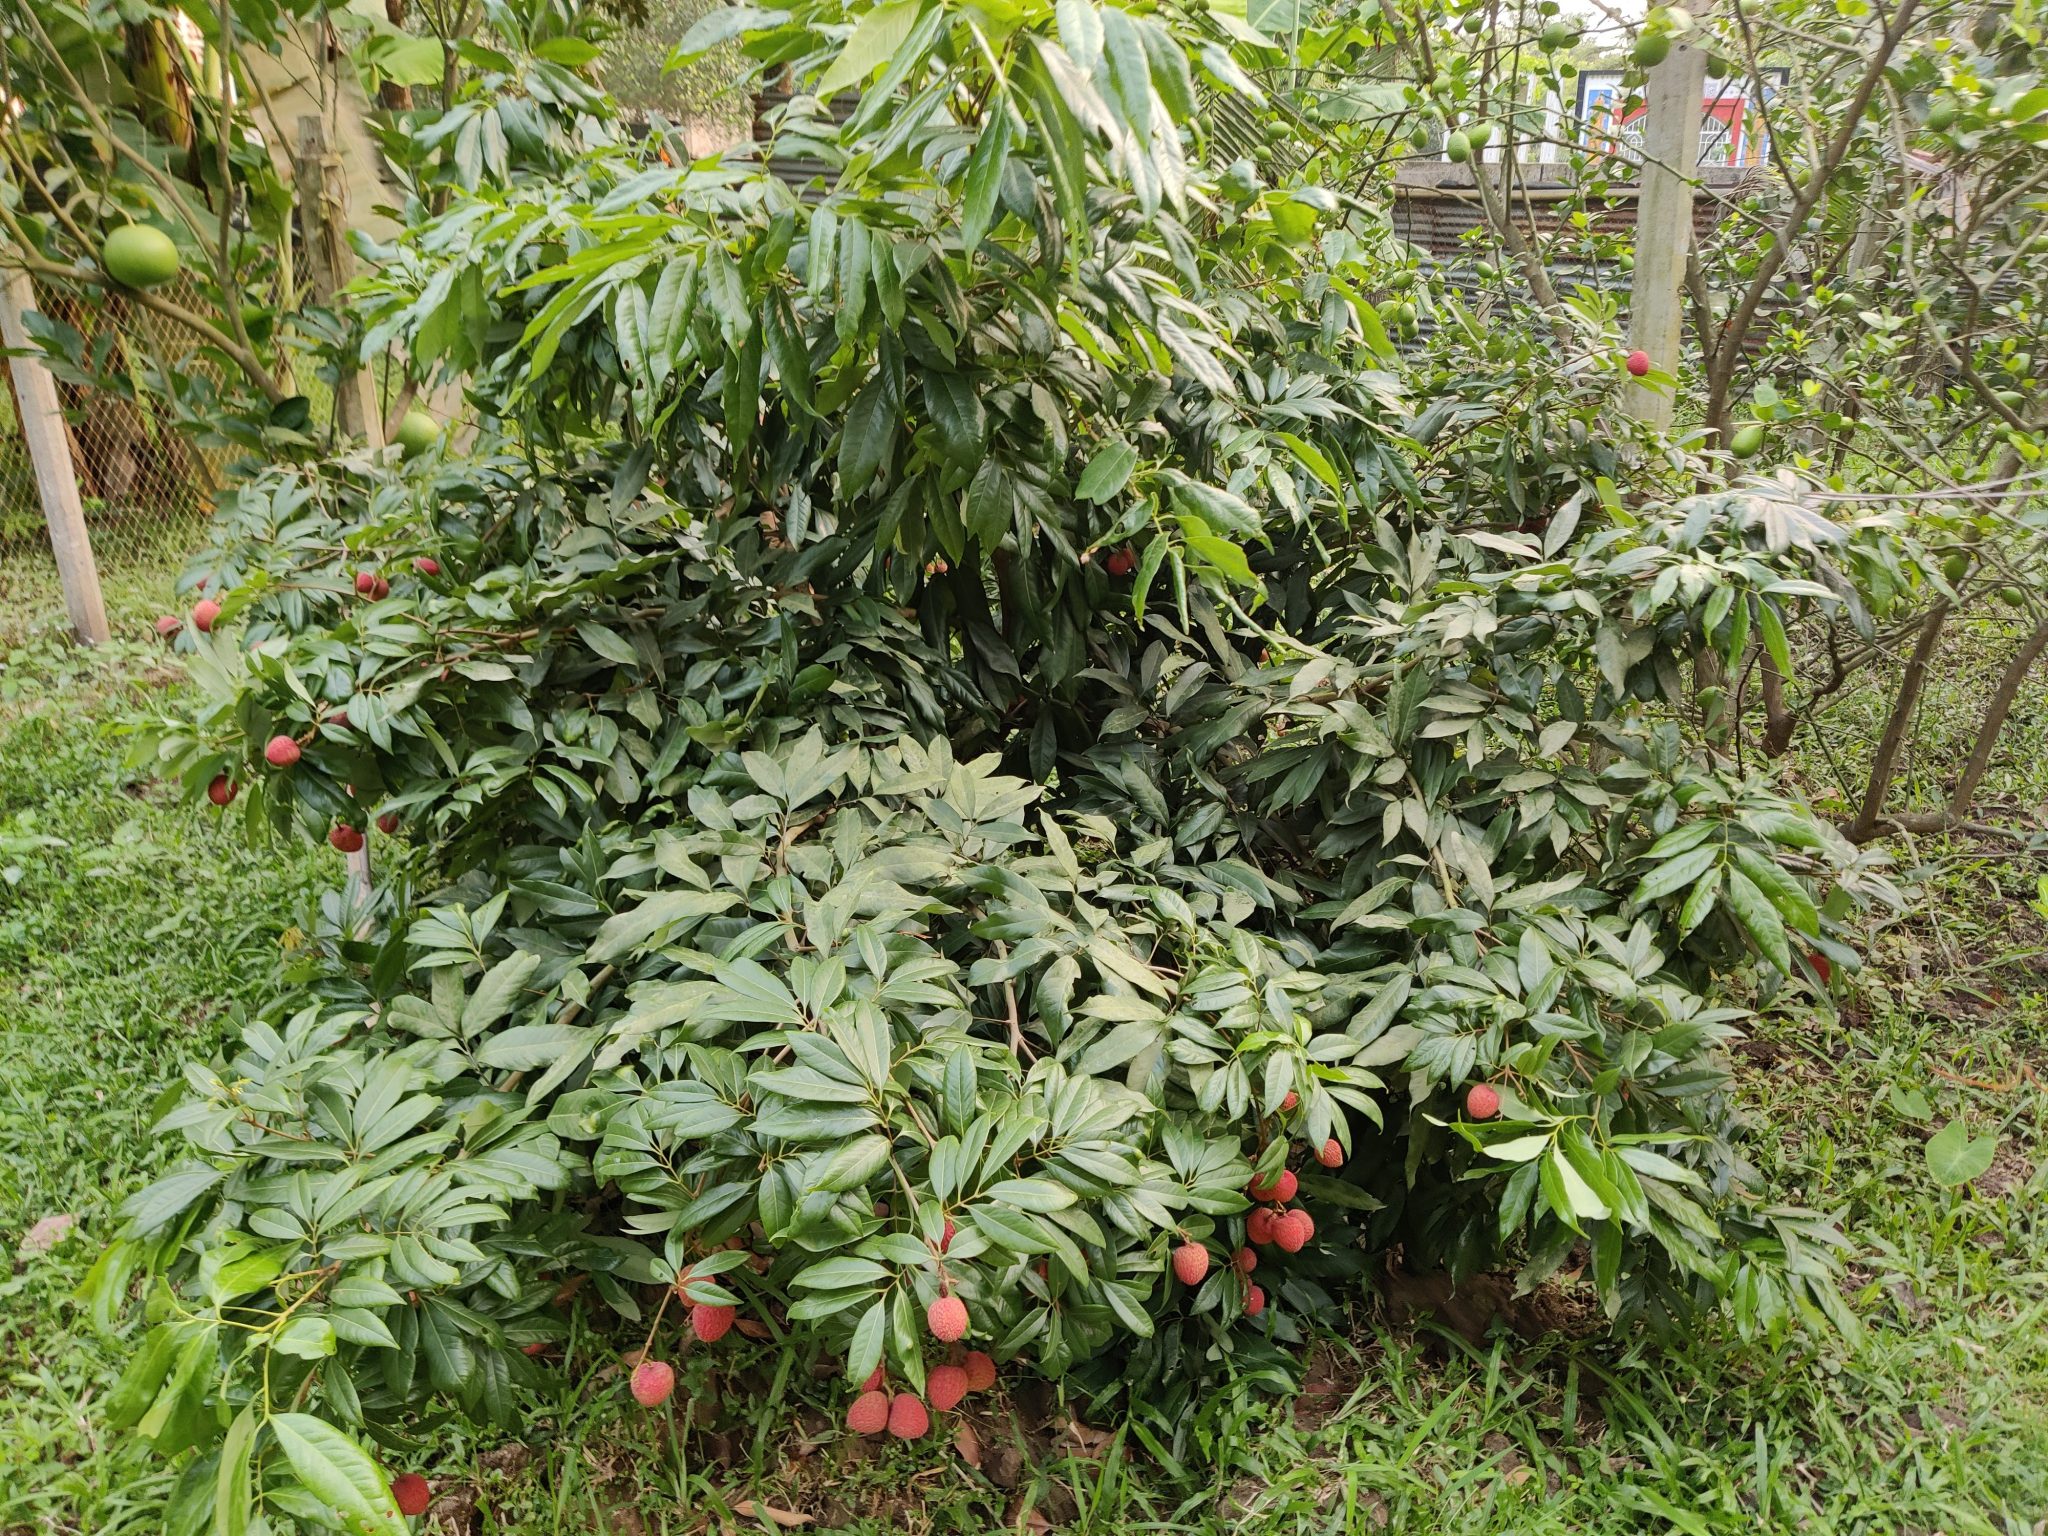 A lychee tree with fruits.